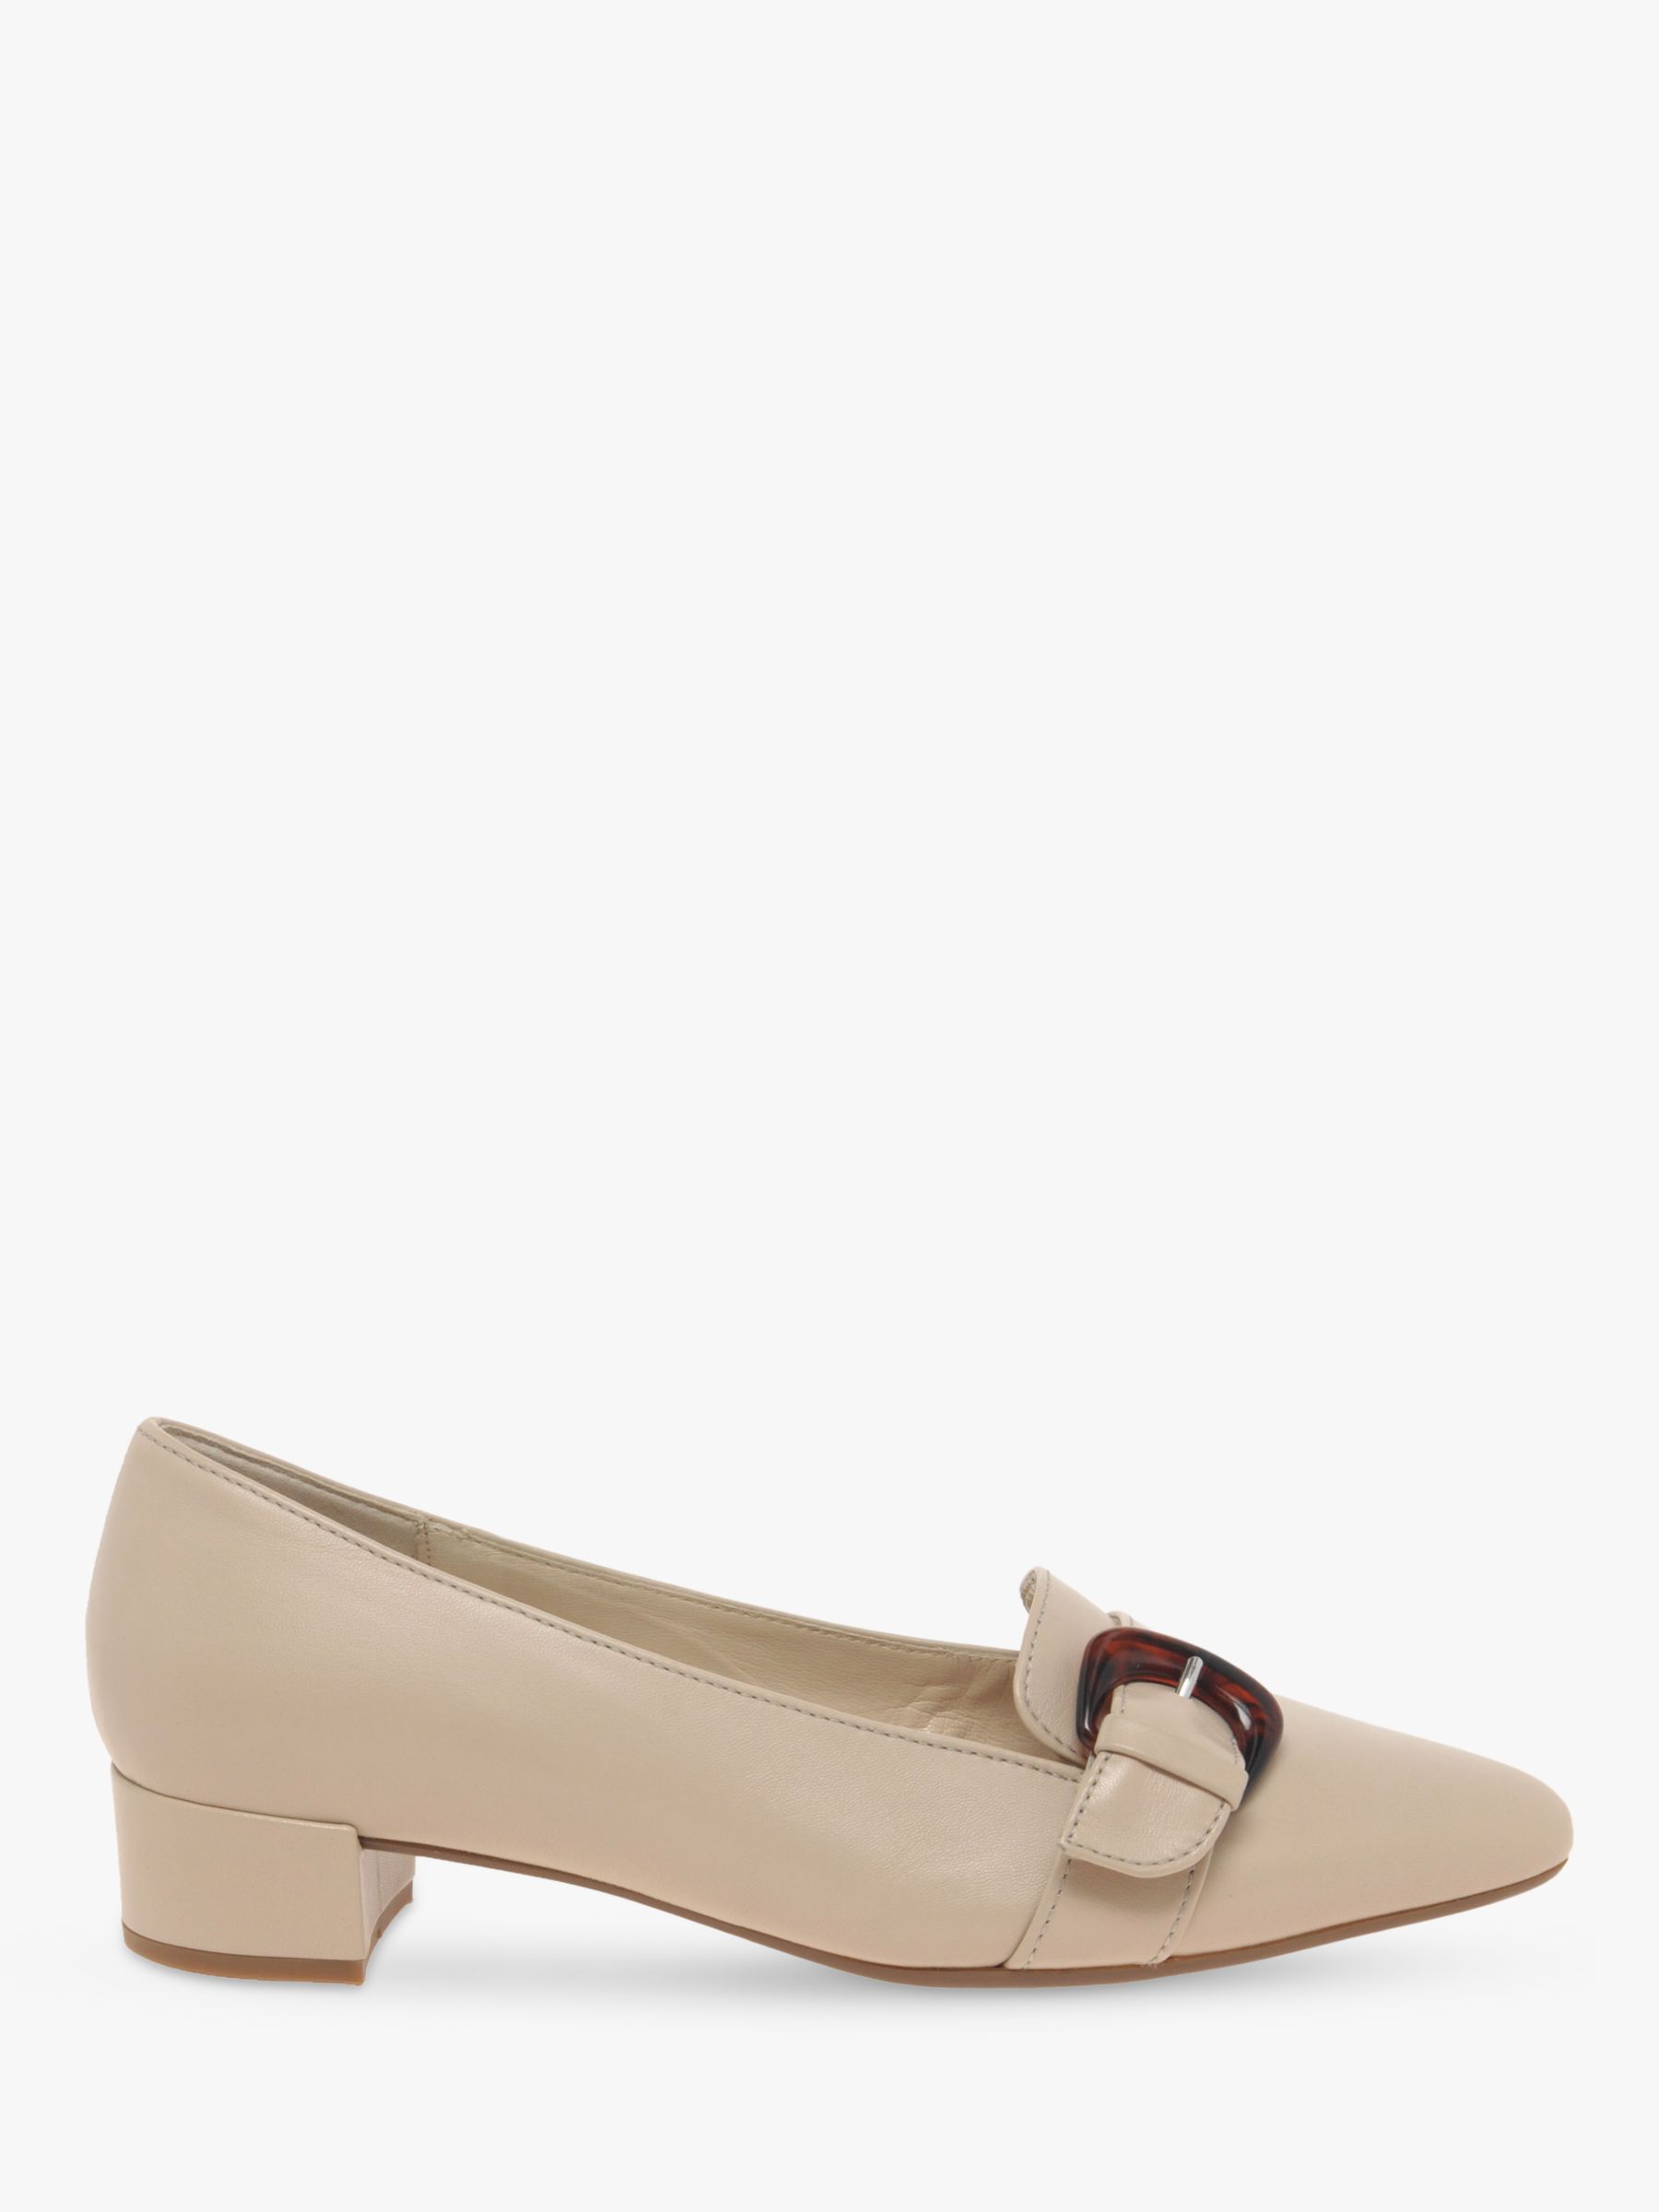 Gabor Predict Leather Court Shoes, New Rose